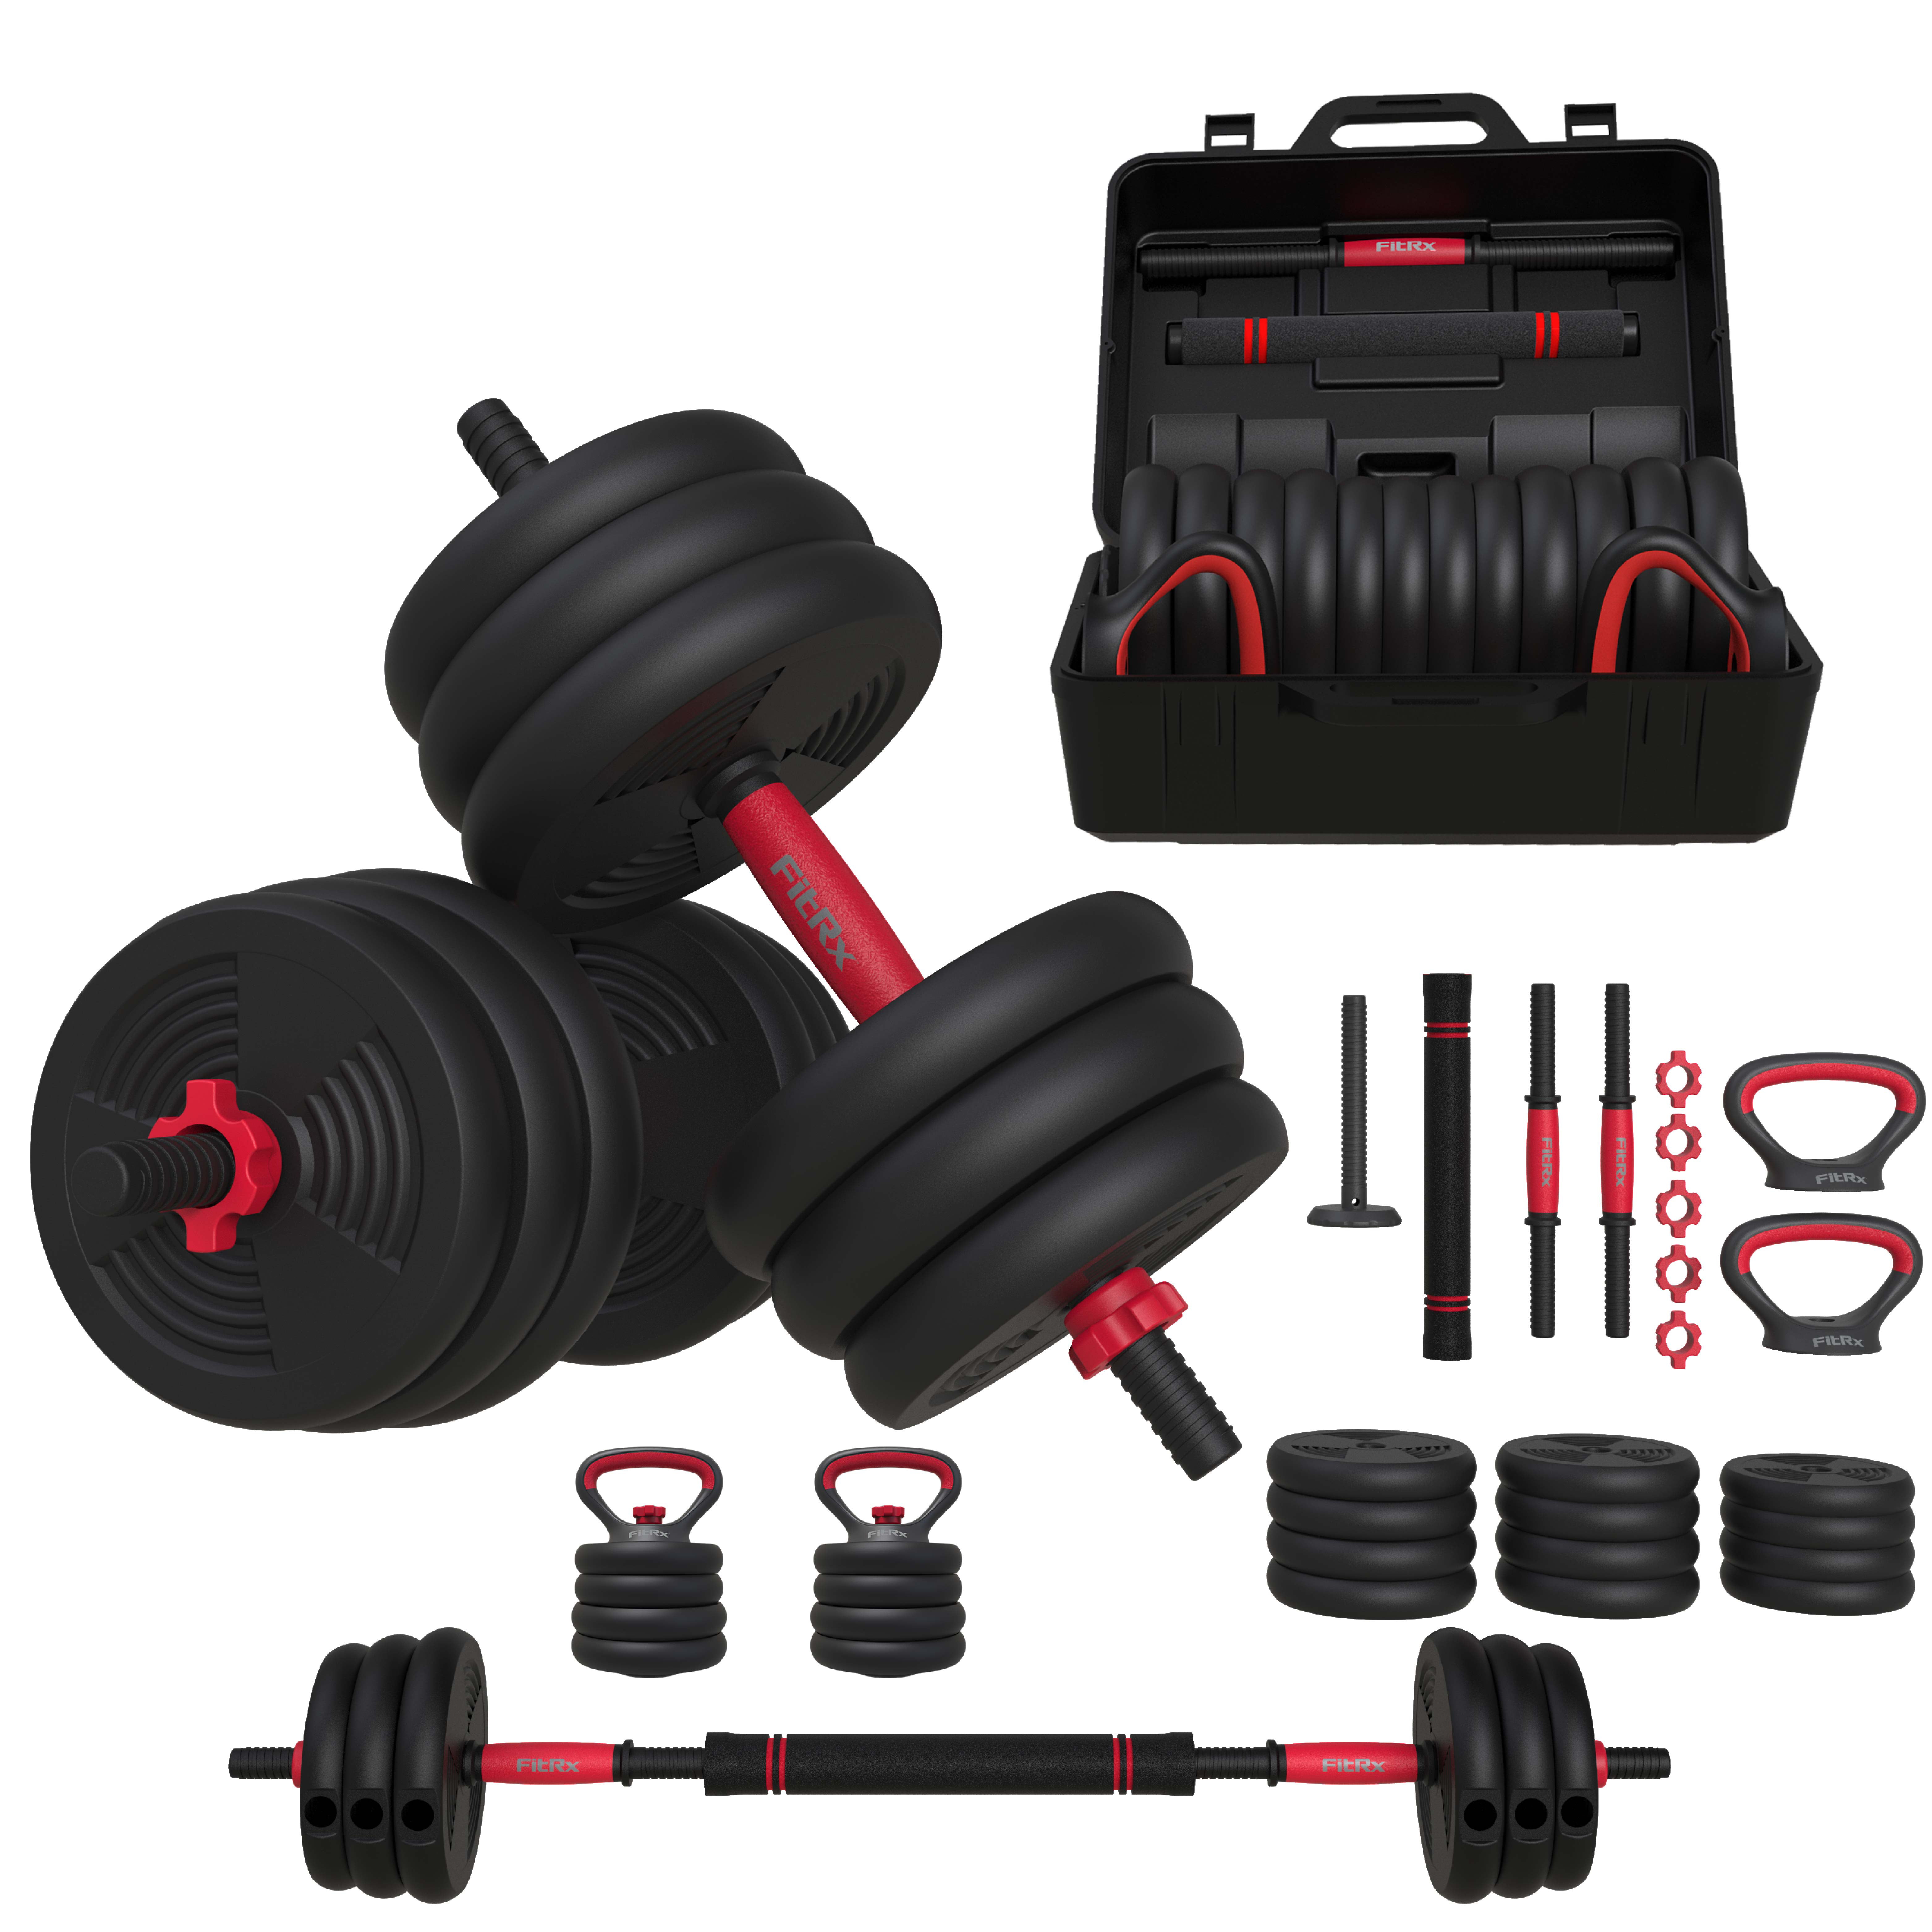 New CAP 1" Free Weight Plates 25lbs & 5lbs Set Gym Barbell Dumbbell Total 60lbs 